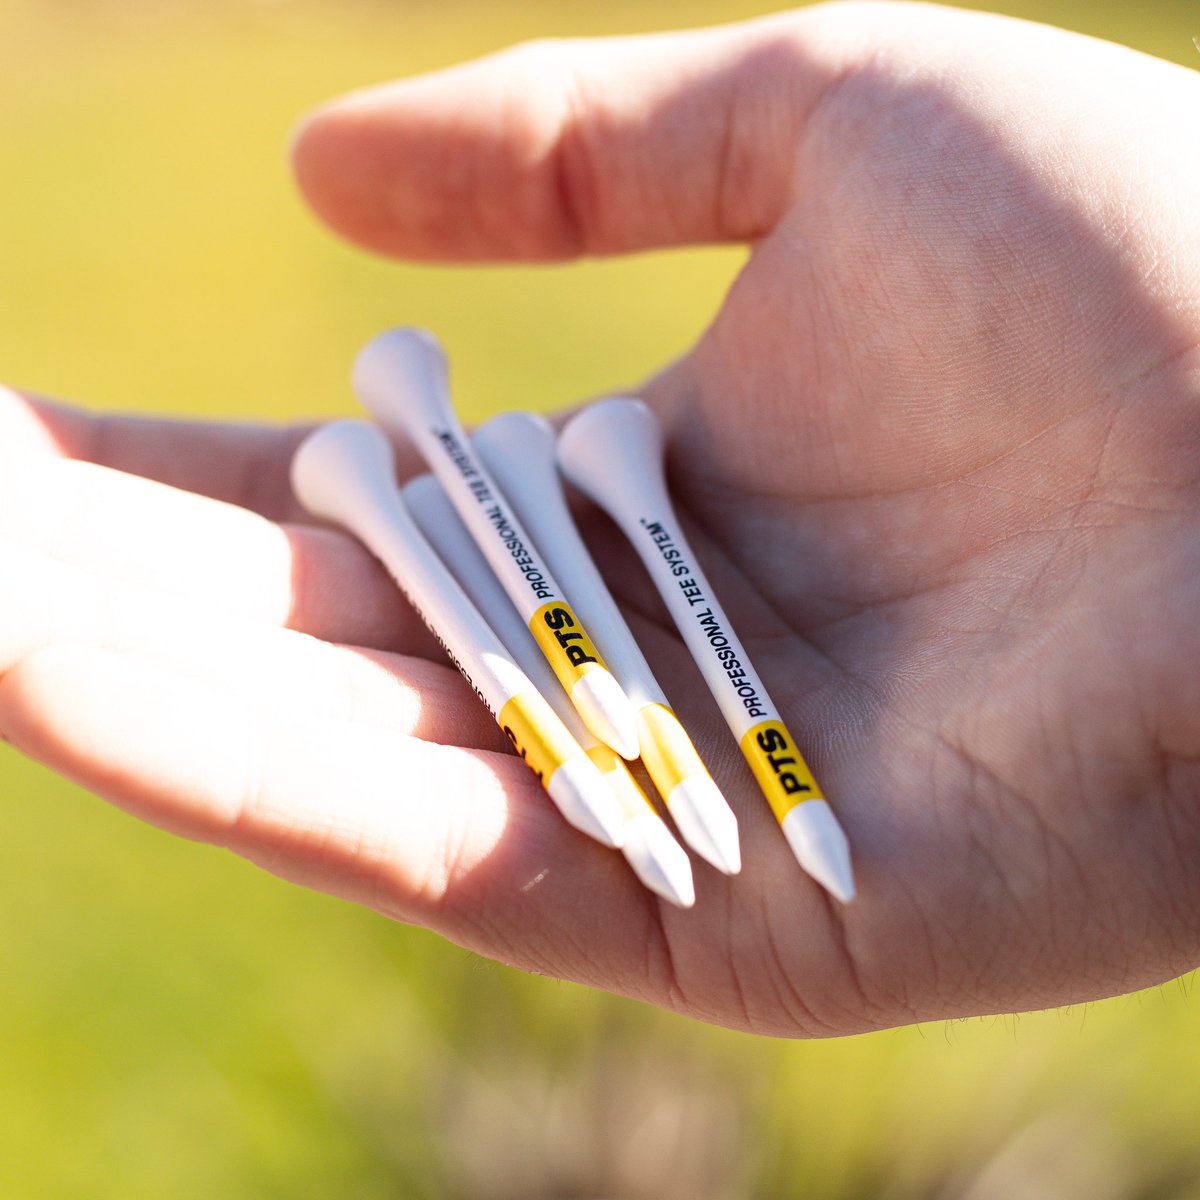 New look PTS Yellow coded (2 3/4 length) golf tees - now available in white wood & natural bamboo.🎋💛

#teeityourway #golftees #golfgear #golfaccessories #golfgame